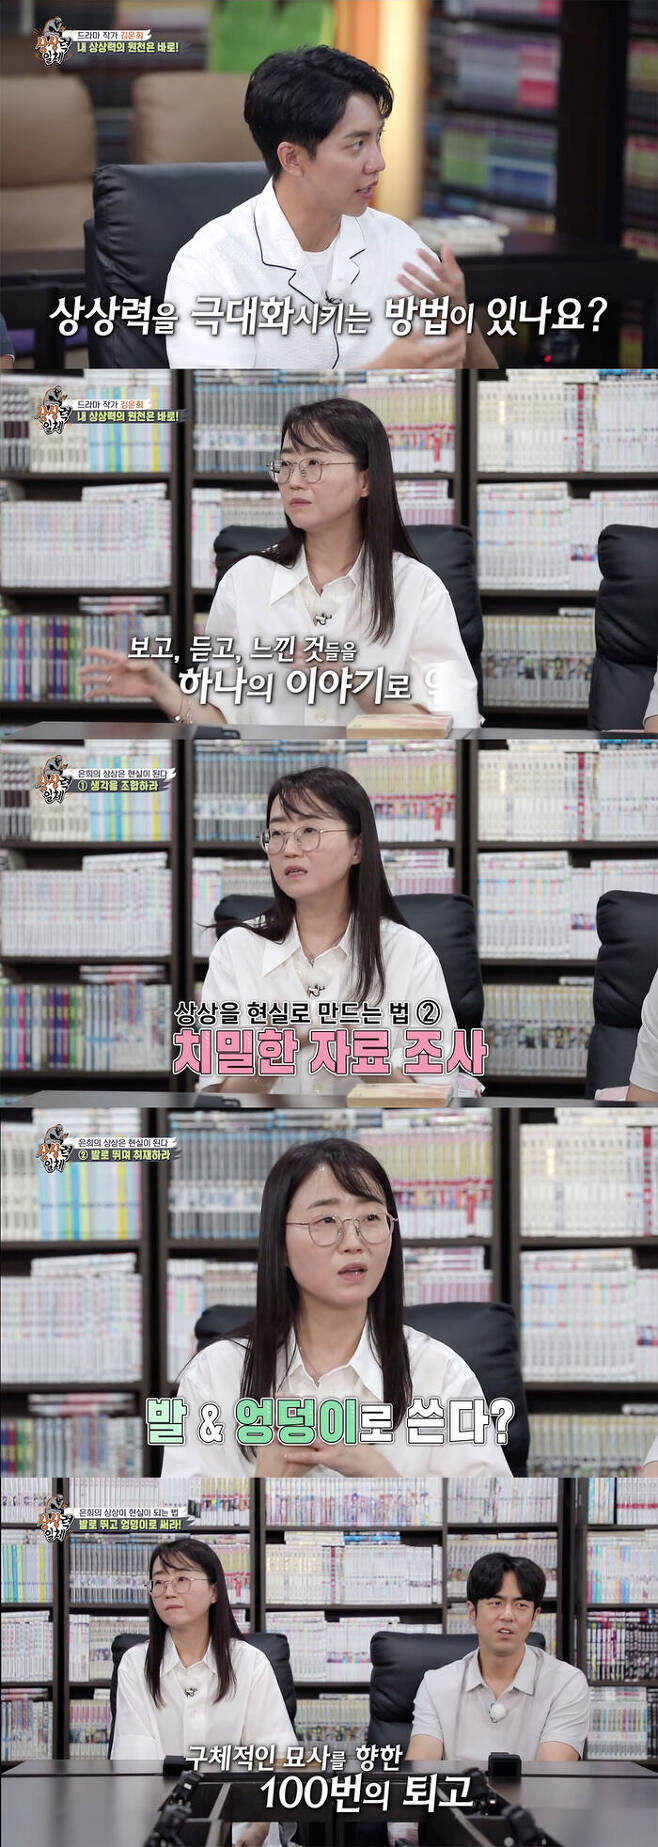 Kim Eun-hee has revealed how to maximize imagination.On the 5th SBS All The Butlers, Kim Eun-hee appeared as a master.Actor Jeon Seok-ho, who participated as a daily student on the day of the broadcast, called Kim on the master of the day, saying, He makes imagination a reality.This is the drama writer Kim Eun-hee who appeared in this.Lee Seung-gi praised Kim Eun-hee as the worlds best, not the Republic of Korea, and Jeon Seok-ho said, It is the creator of genres.Kim Eun-hee explained how to maximize imagination, I have been interested in articles that I have been interested in so far, and I have been listening to and listening to books I have enjoyed.And in the background of Kingdom, Zombie 2: The Dead are Among Us originally liked the historical drama and liked history, so the story started with the imagination of Korea under Japan rule Zombie 2: The Dead are Among Us story.He also said that he meets with experts from various generations and fields to make the story that started from imagination real, and creates such a realistic script. Script should be written with feet rather than heads.Yang Se-hyeong asked Master Kim Eun-hee about the birthplace of the unique type of Korean Zombie 2: The Dead are Amon Us.Kim Eun-hee said, Zombie 2: The Dead are Among Us are not hungry children.If all desires are lost and appetite is left, it is a hungry being, but now it is a world far from hunger, but the Korea under Japan rule was full of hunger.It is enough to record that the common people have not been able to overcome hunger and have eaten their children, he said. K-Zombie 2: The Dead are Among Us was created through imagination based on such reality.And Kim Eun-hee said, Drama is written on the foot and used as a hip. Sometimes I sit almost all day.Some days, the number of steps on the cell phone was 78, he said, and surprised everyone by revealing that he was going through 100 retreats per time for specific descriptions.On the same day, Kim Eun-hee said he would present The Notebook, which he had used since 2016, to the best student of the fairy tale adaptation.In particular, The Notebook has stored all the scripts of the signal, Kingdom, and Jirisan, which will be aired soon, and it is full of small ideas.